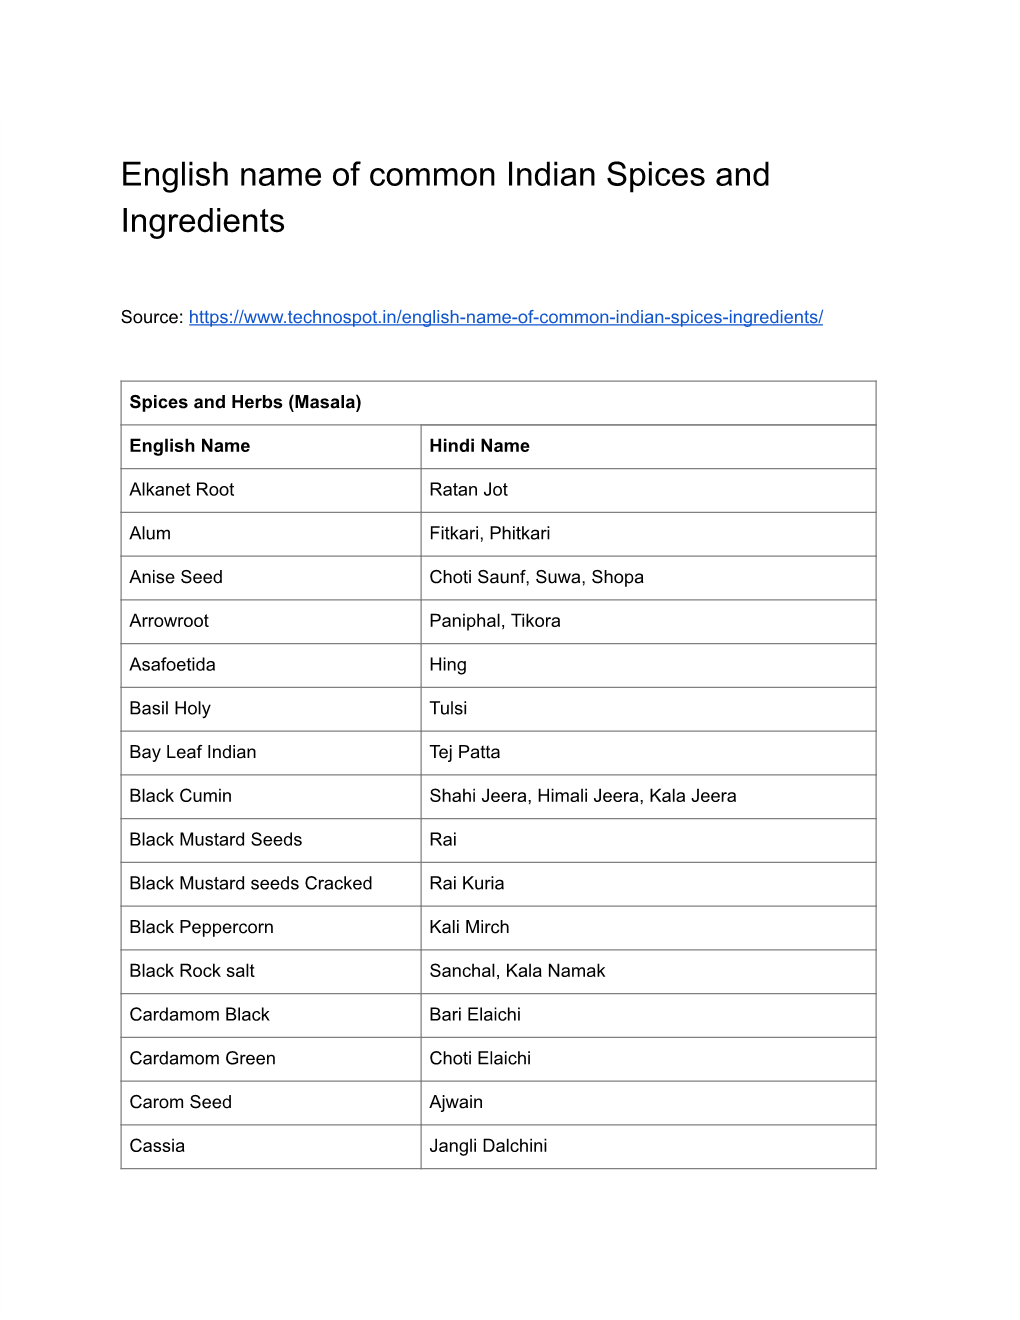 English Name of Common Indian Spices and Ingredients